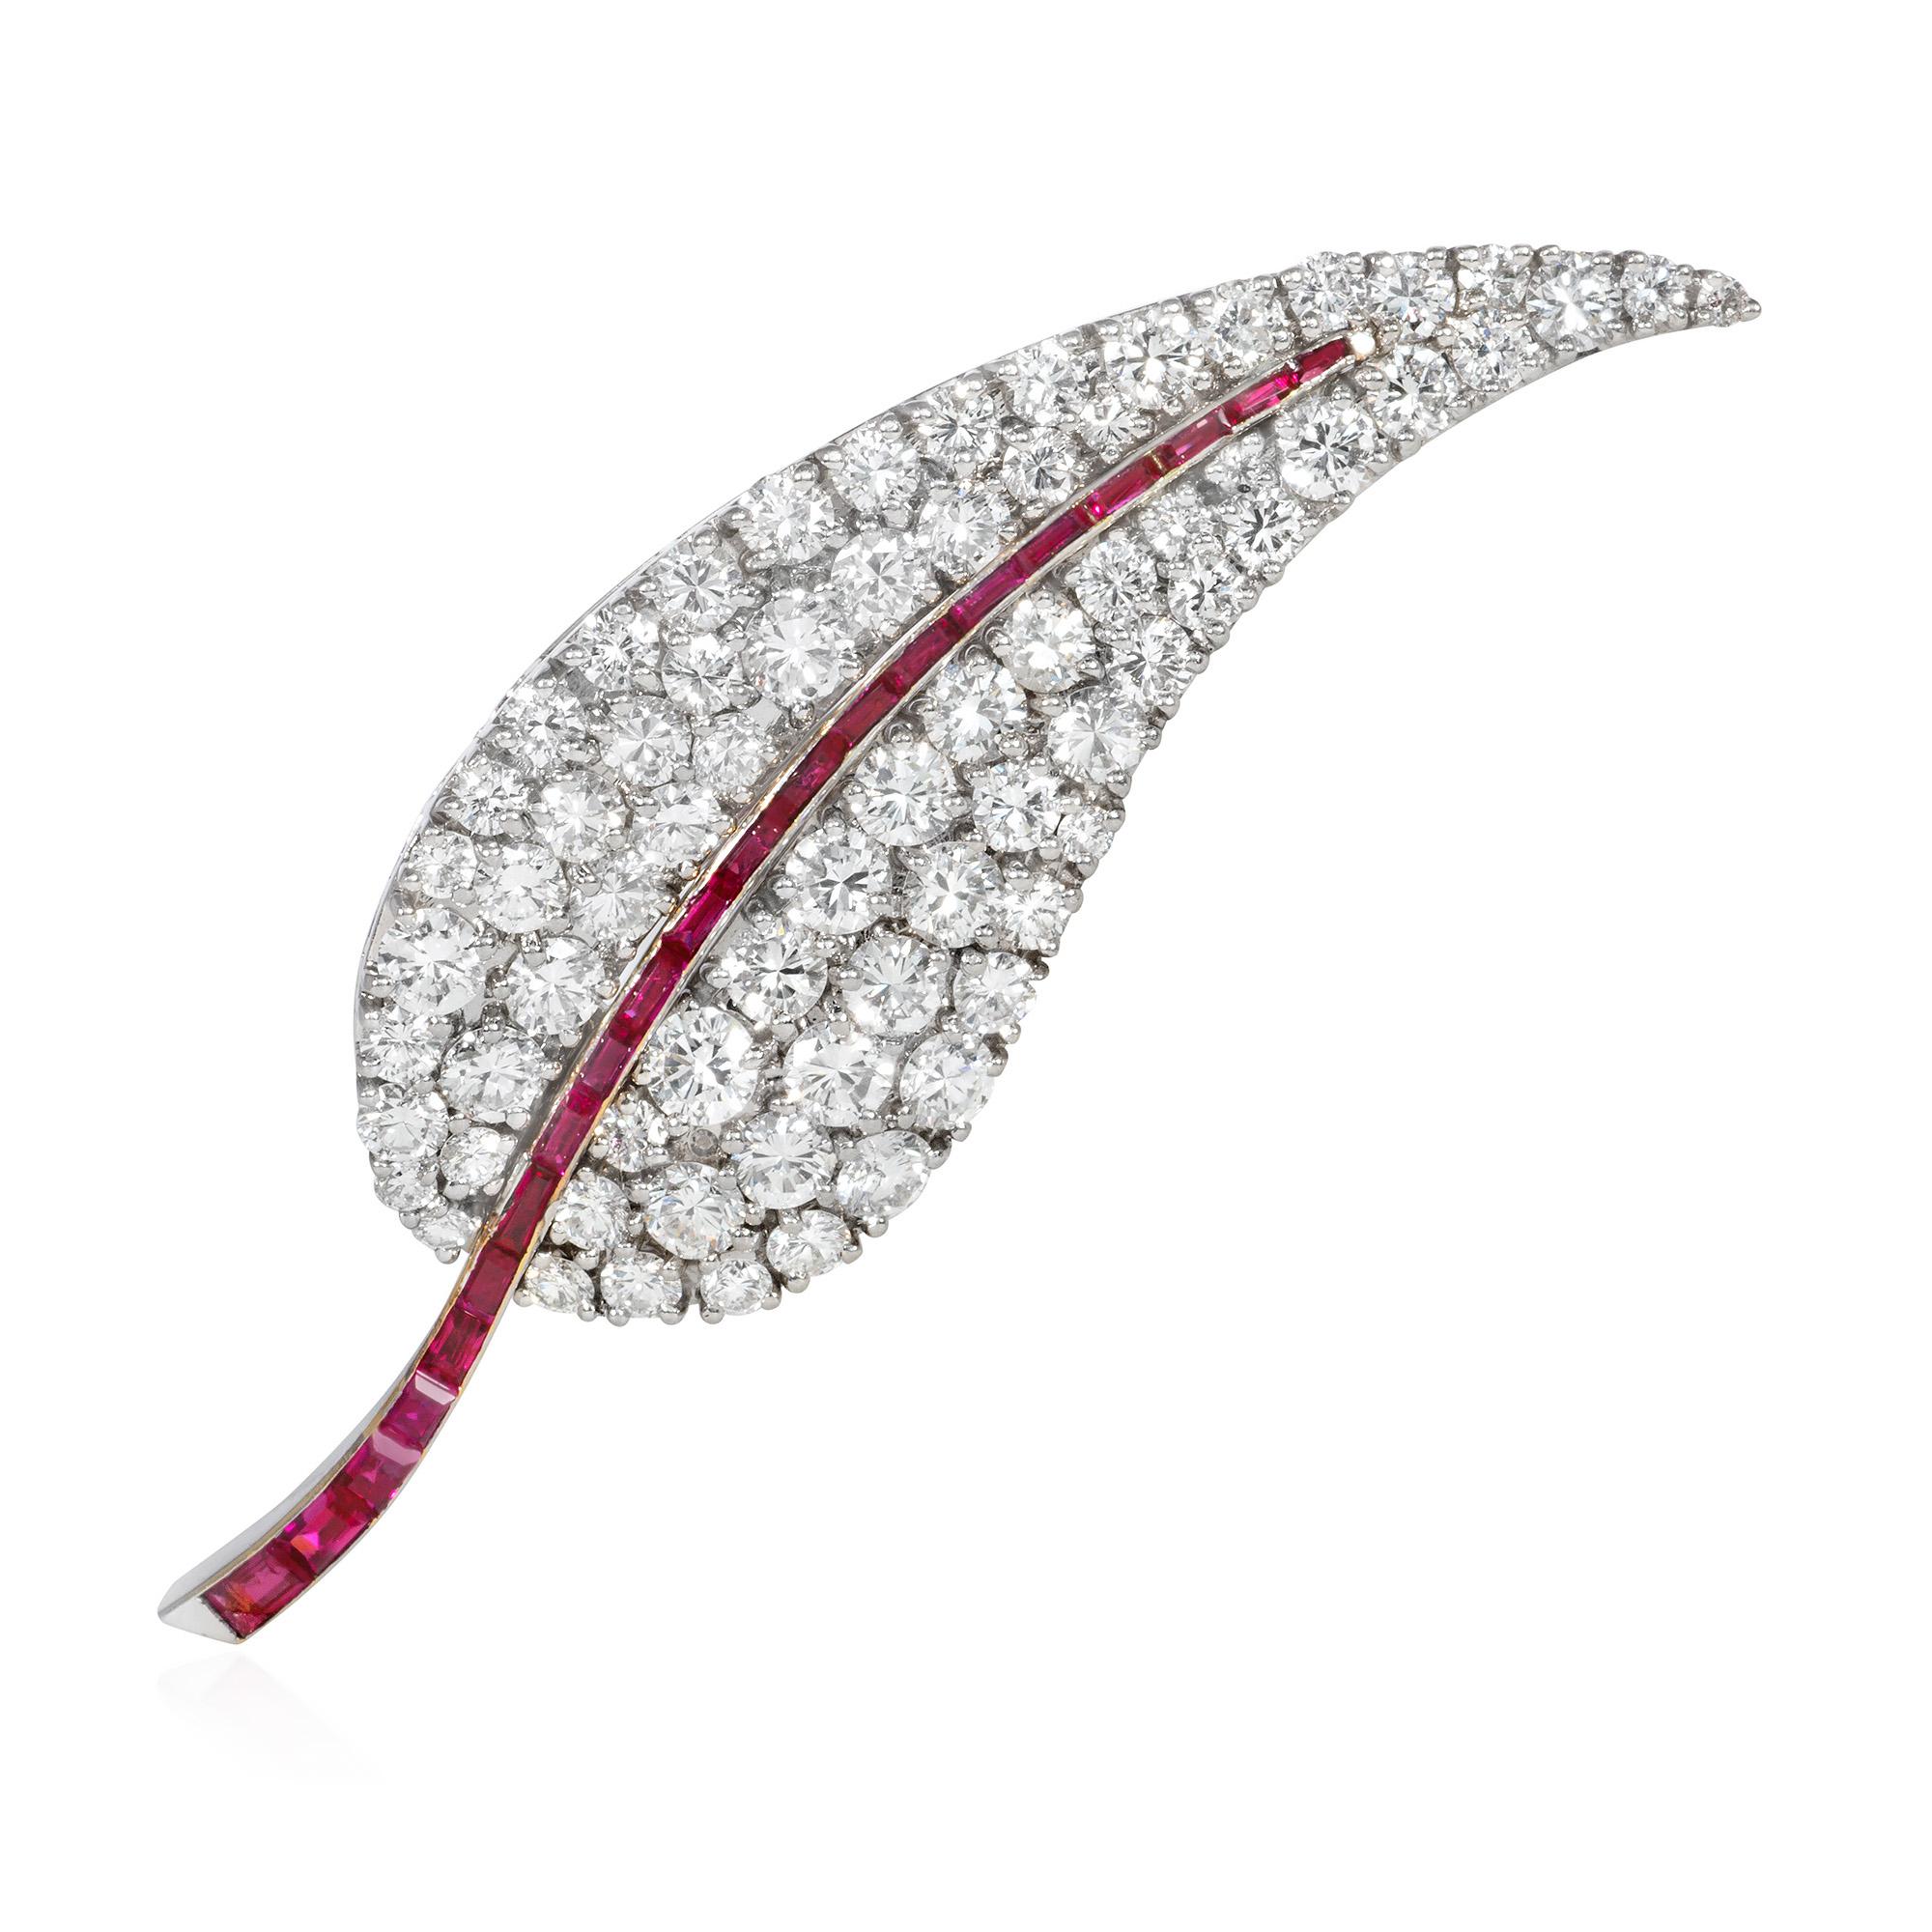 Modern French 1950s Diamond Leaf Brooch with Interchangeable Multi-Gem Spine Inserts